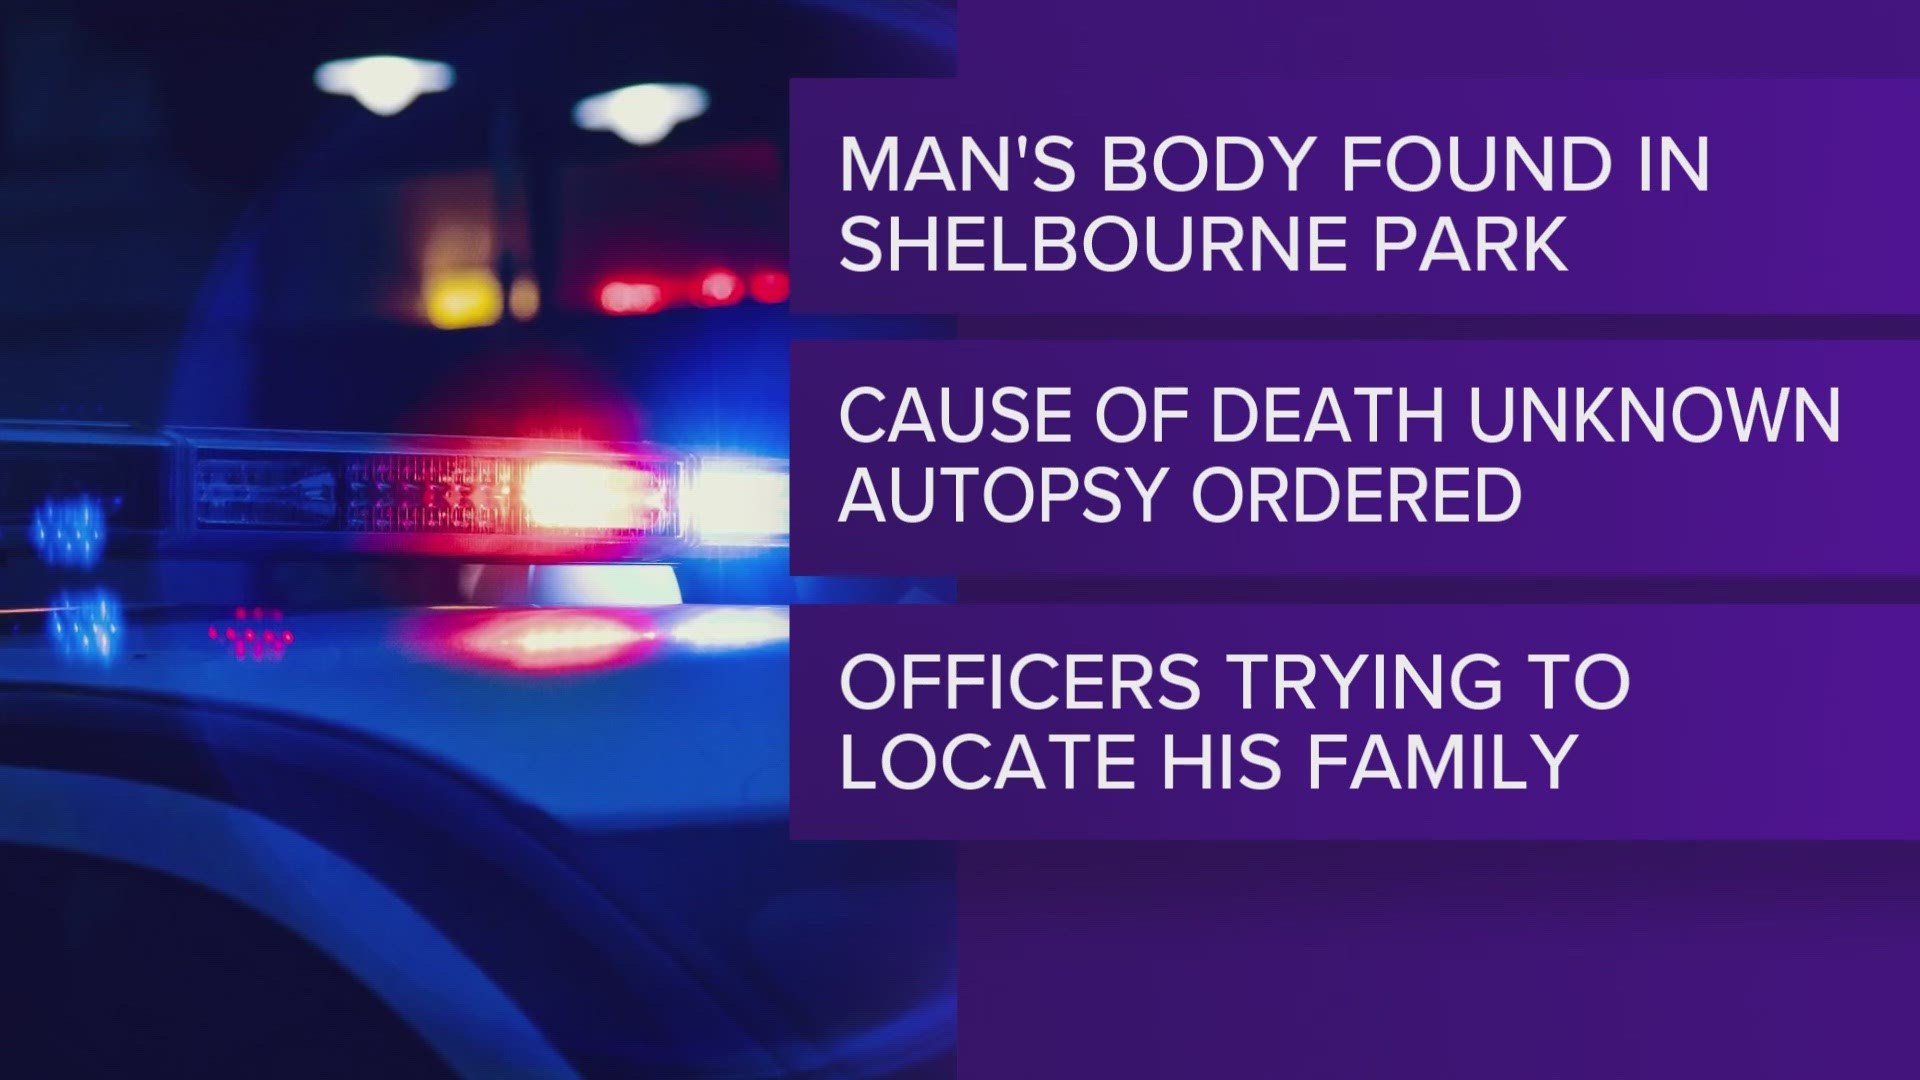 The man appeared to have been unresponsive at Shelbourne Park for several hours, Stanton PD says.